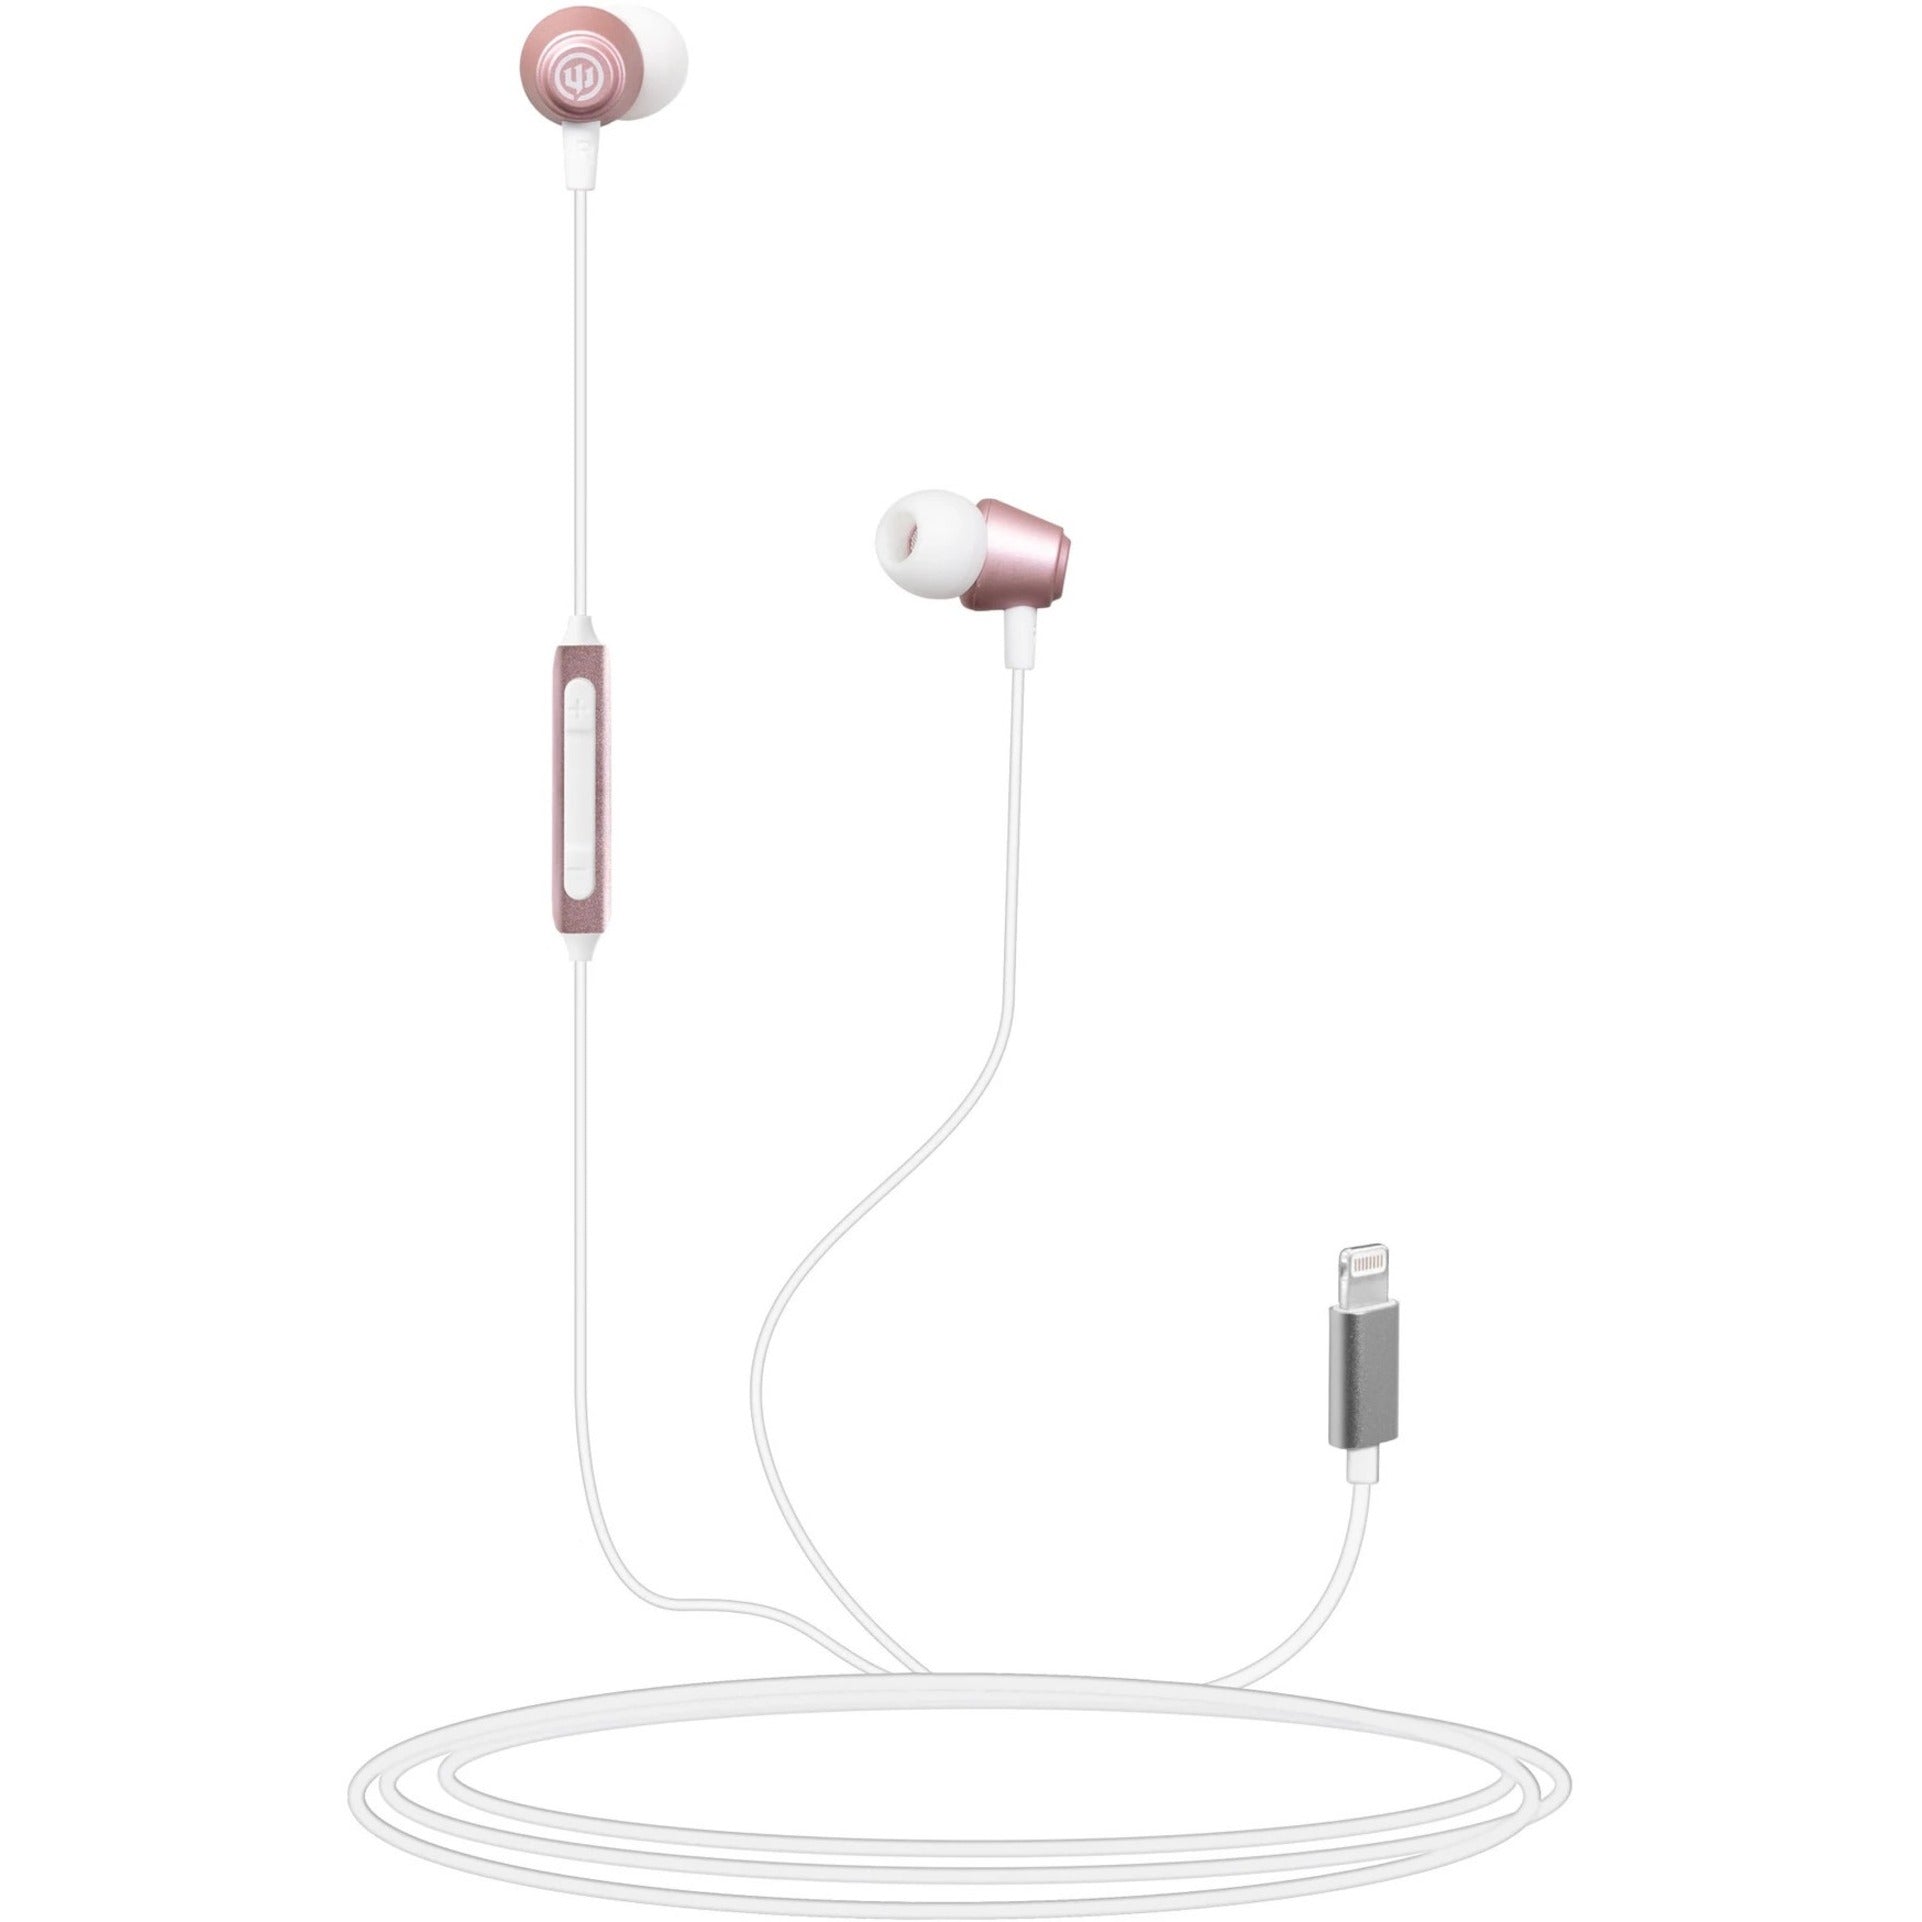 Wicked WI-4251 Ravian Earset, Rose Gold, Bass Boost, Comfortable